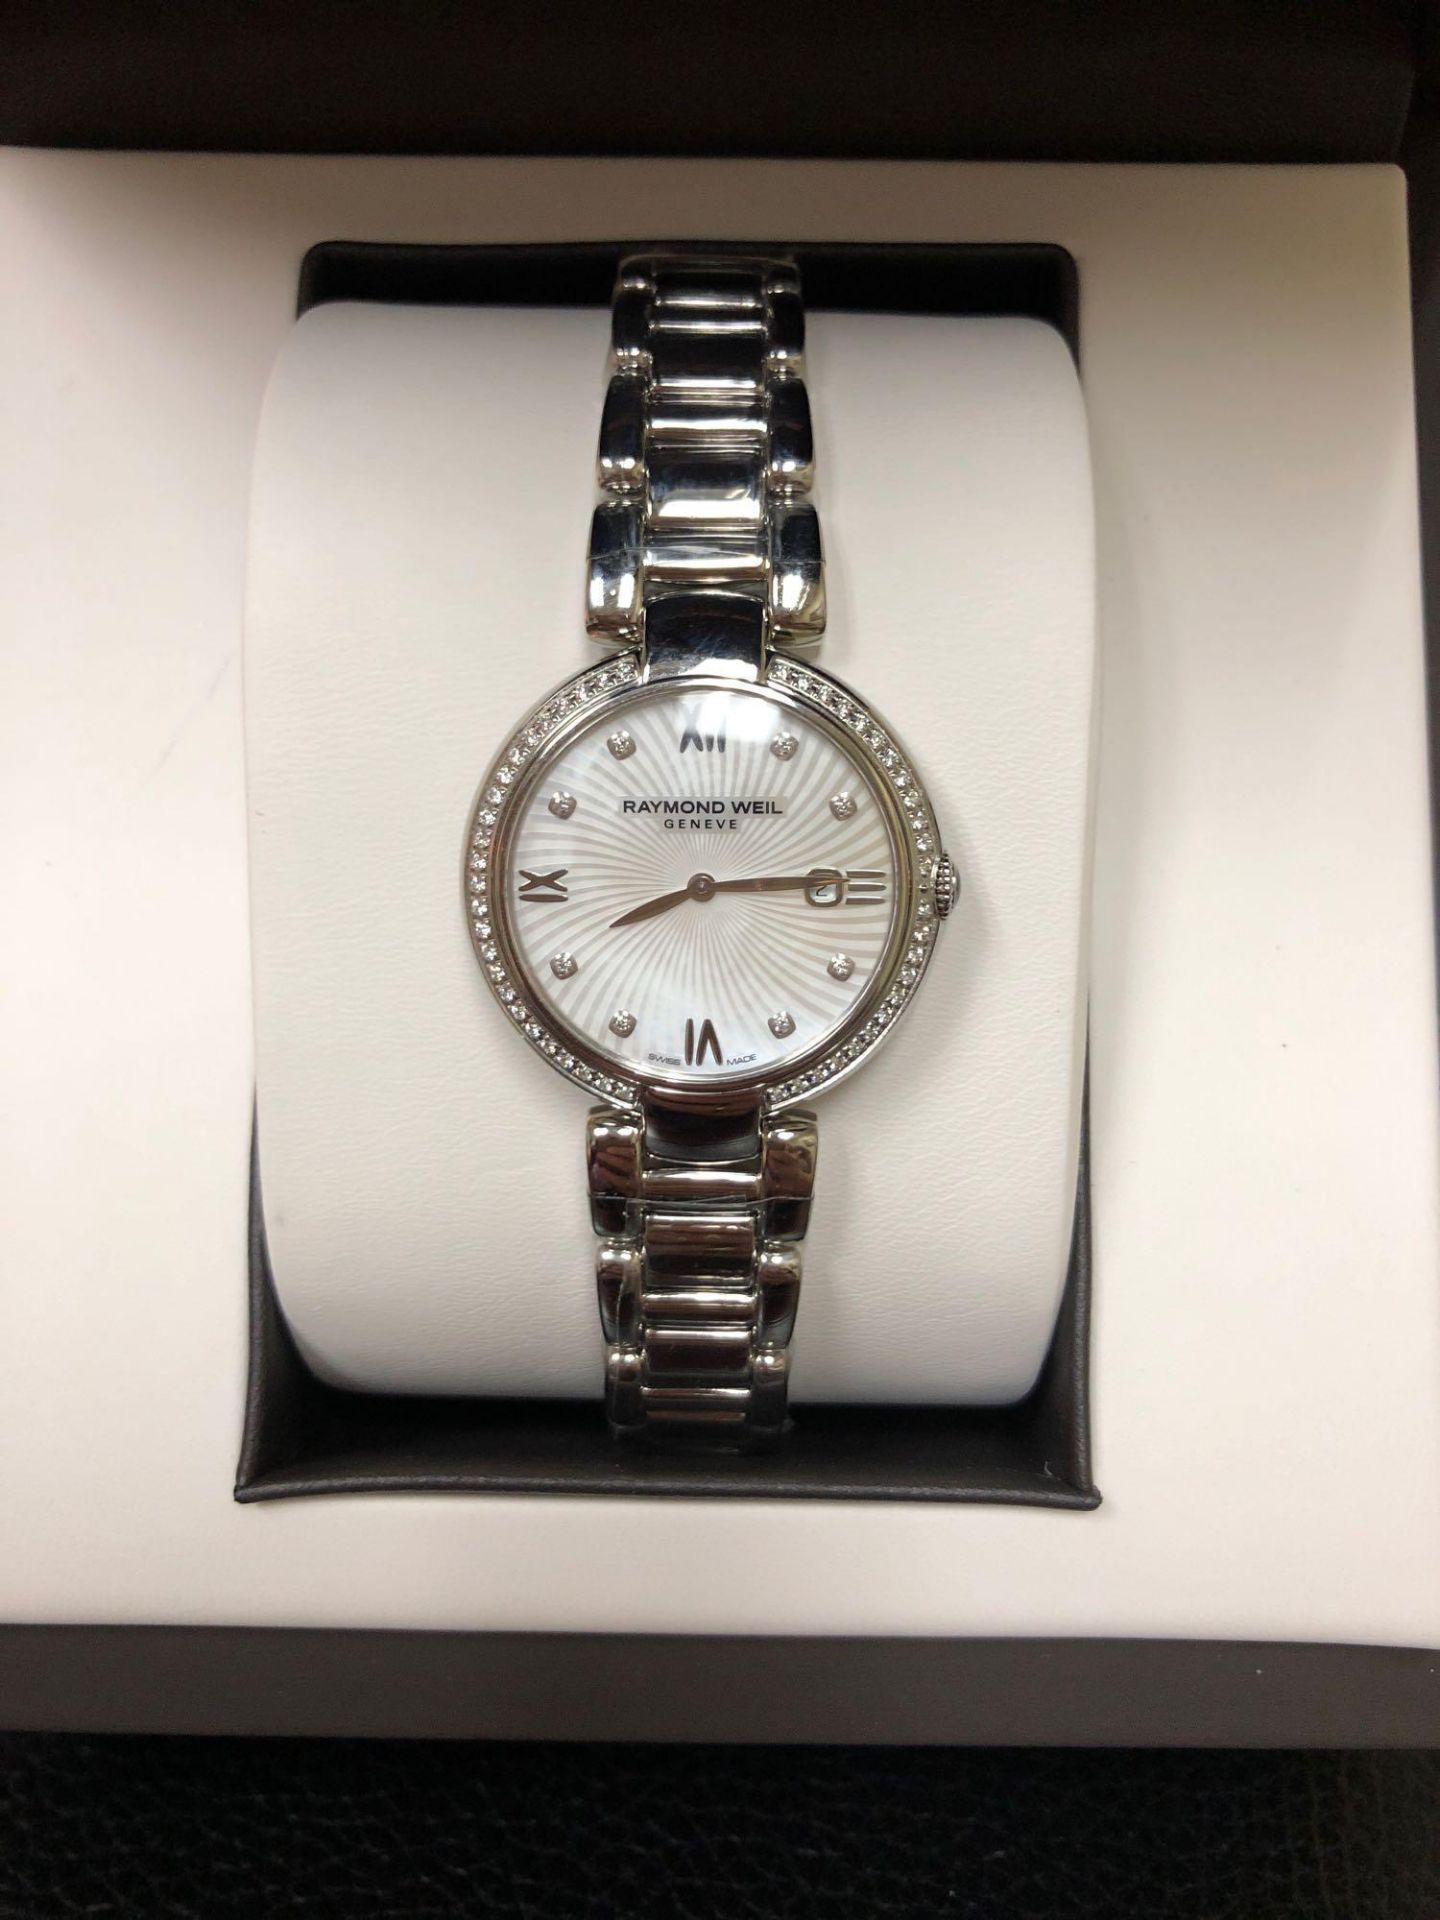 RAYMOND WEIL LADIES SHINE STAINLESS STEEL WATCH WITH DIAMOND DIAL AND BEZEL